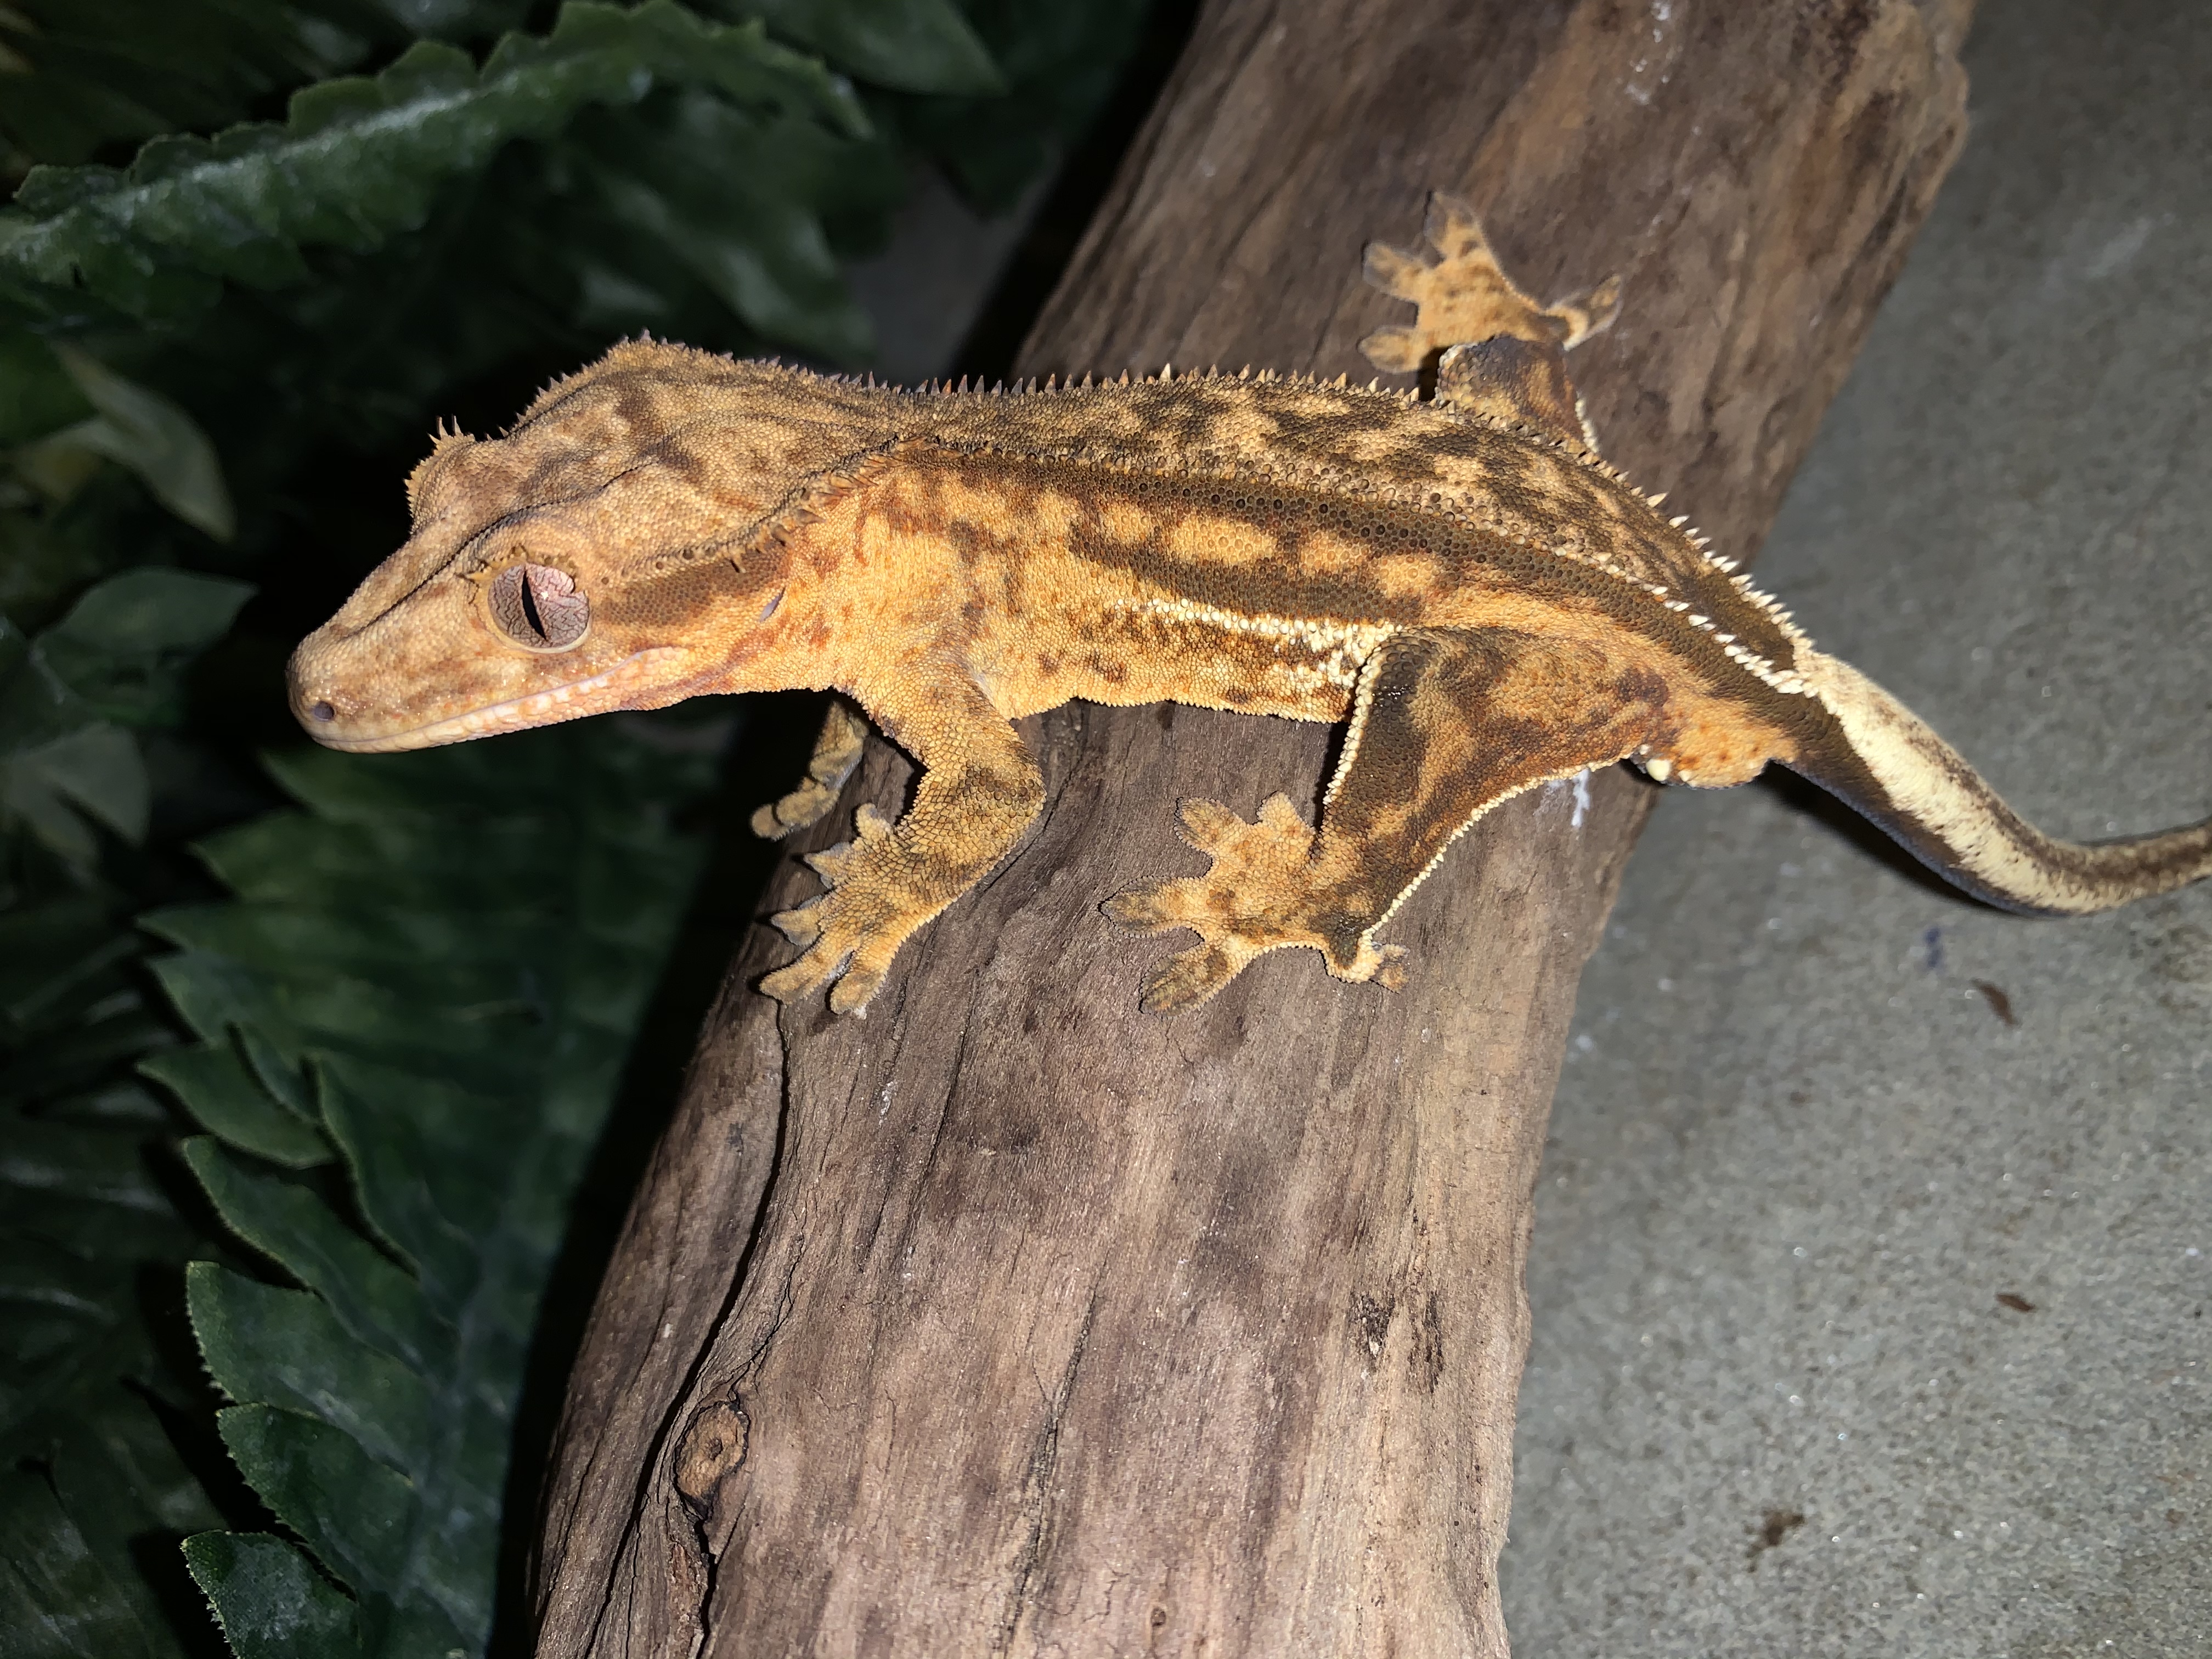 Quadstripe Crested Gecko by Taylor exotics